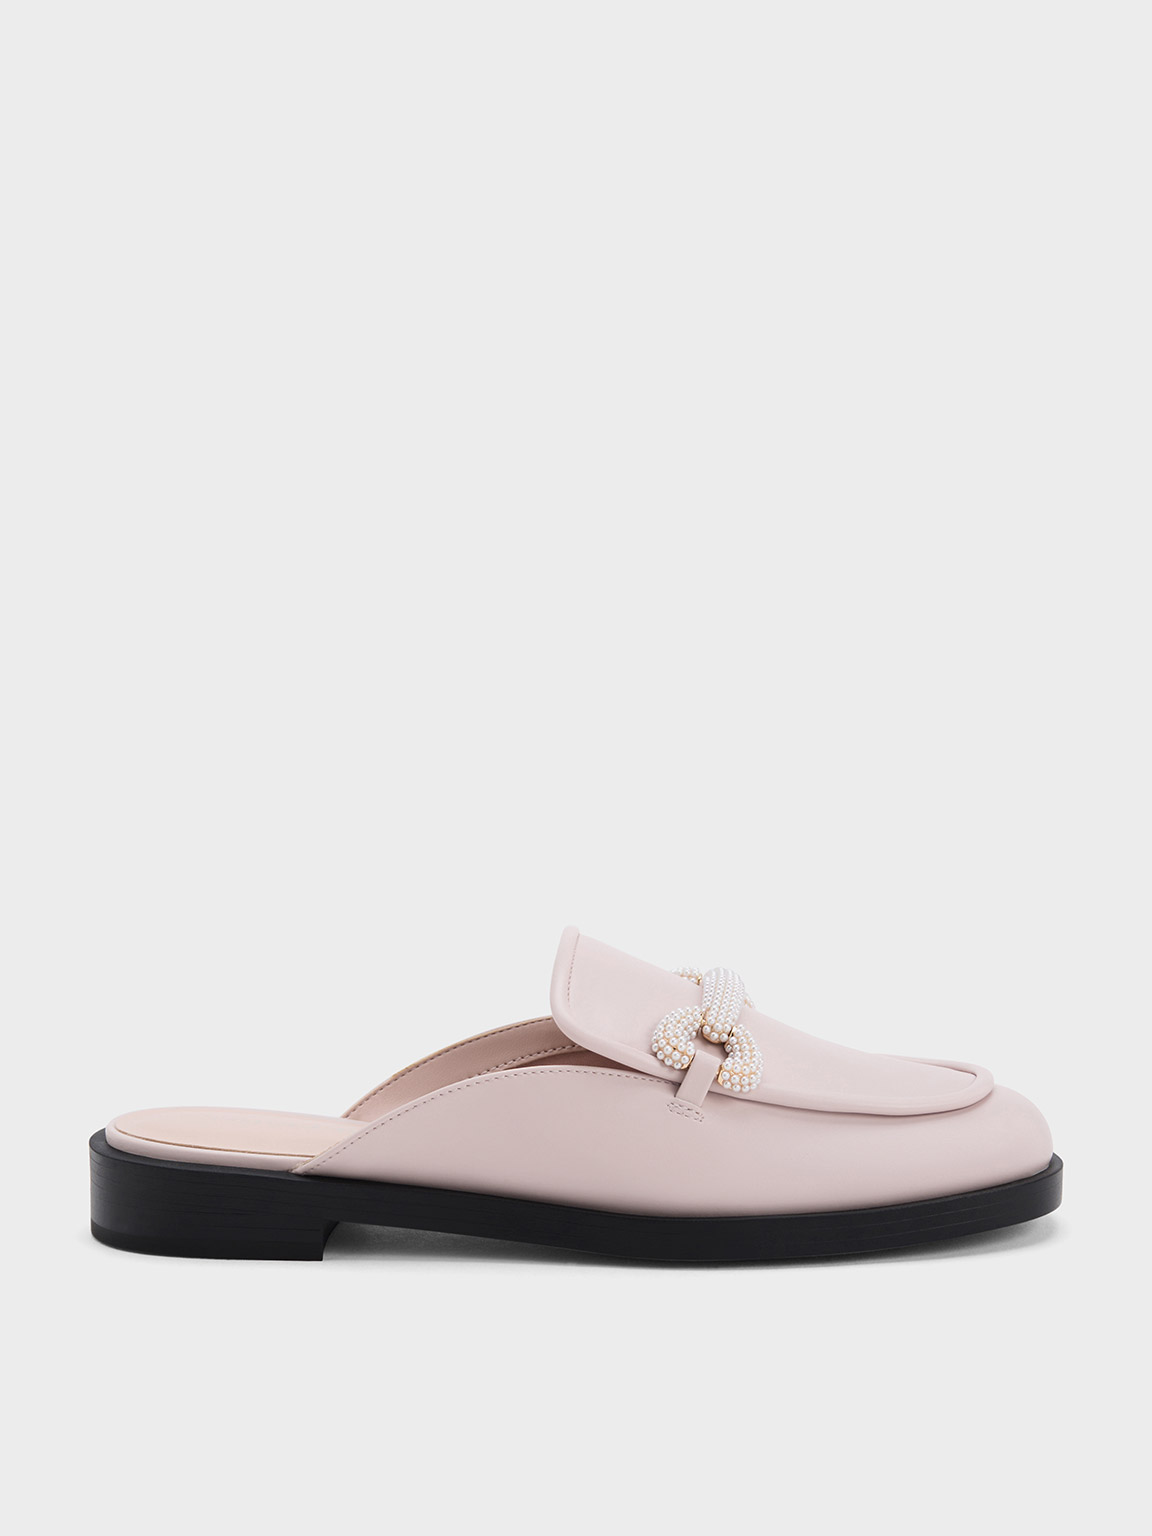 Charles & Keith Beaded Accent Loafer Mules In Blush